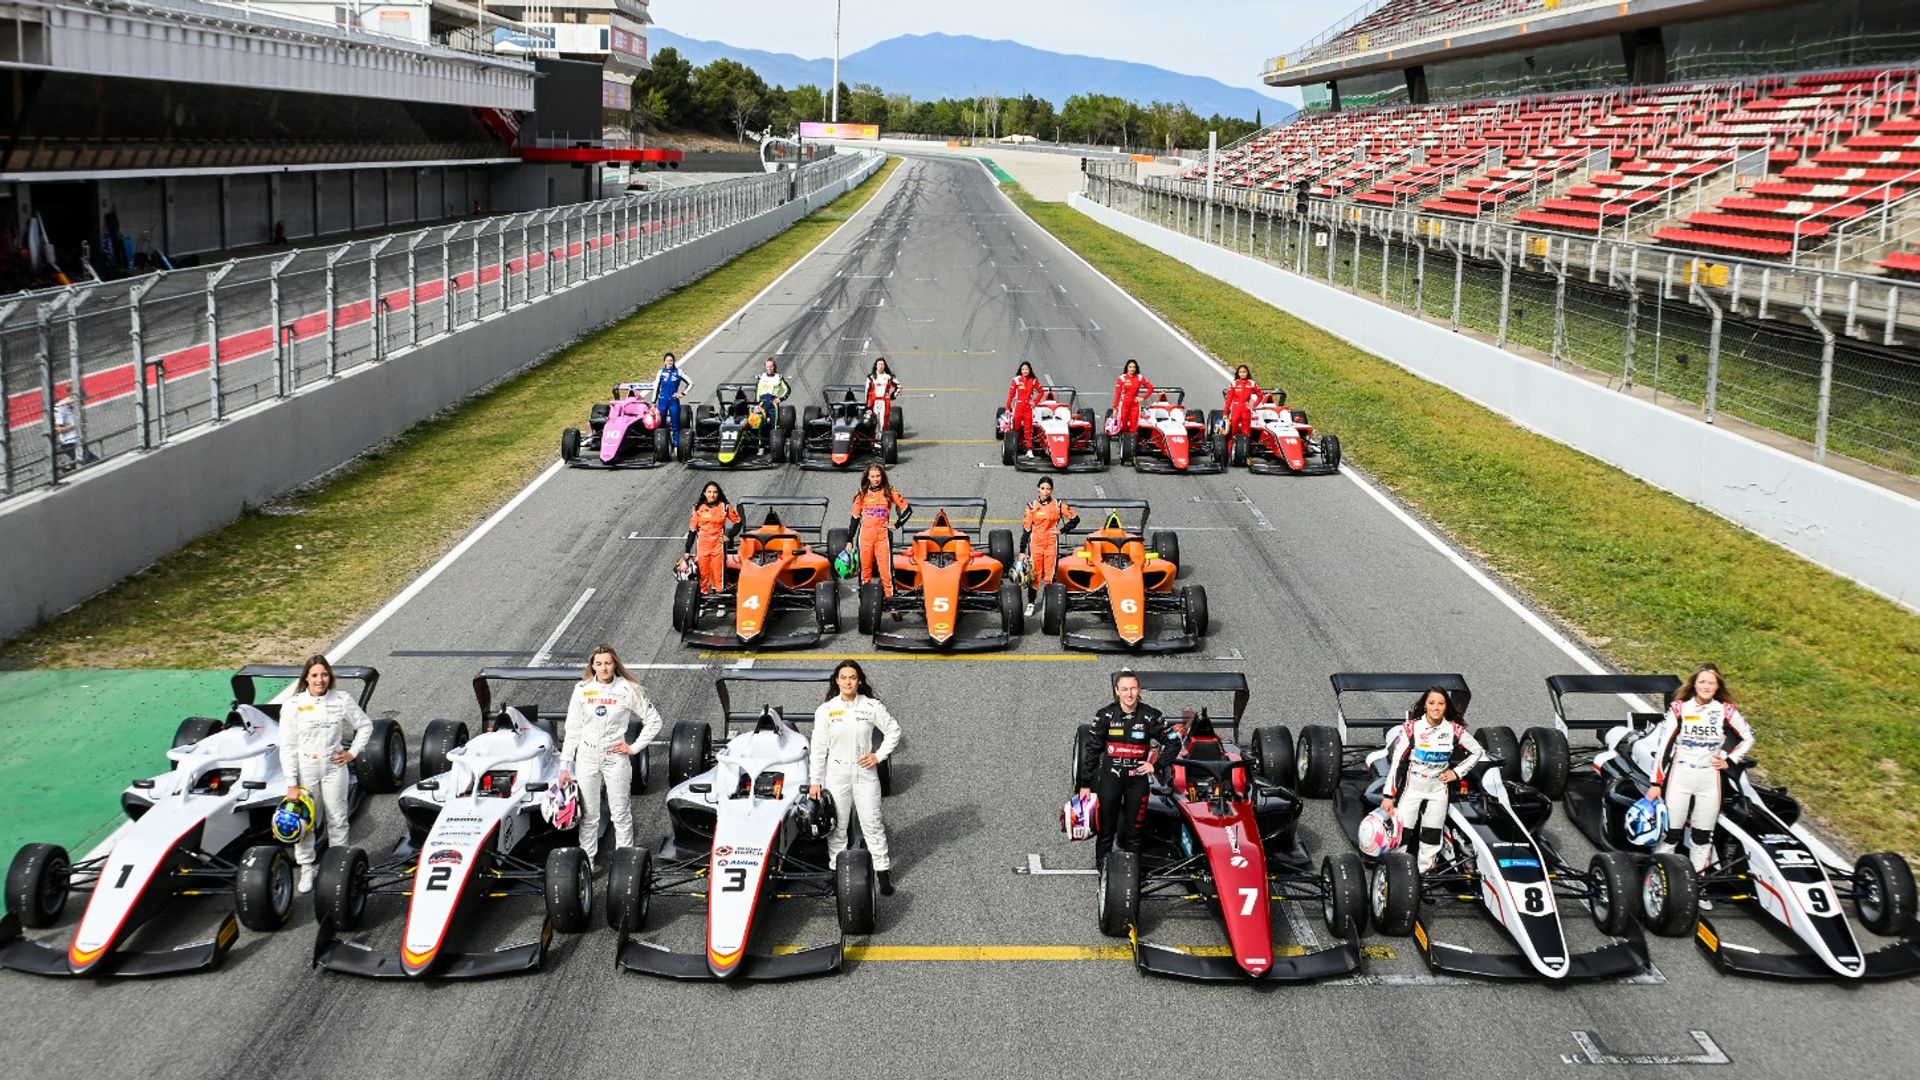 F1 Academy: All you need to know ahead of inaugural season